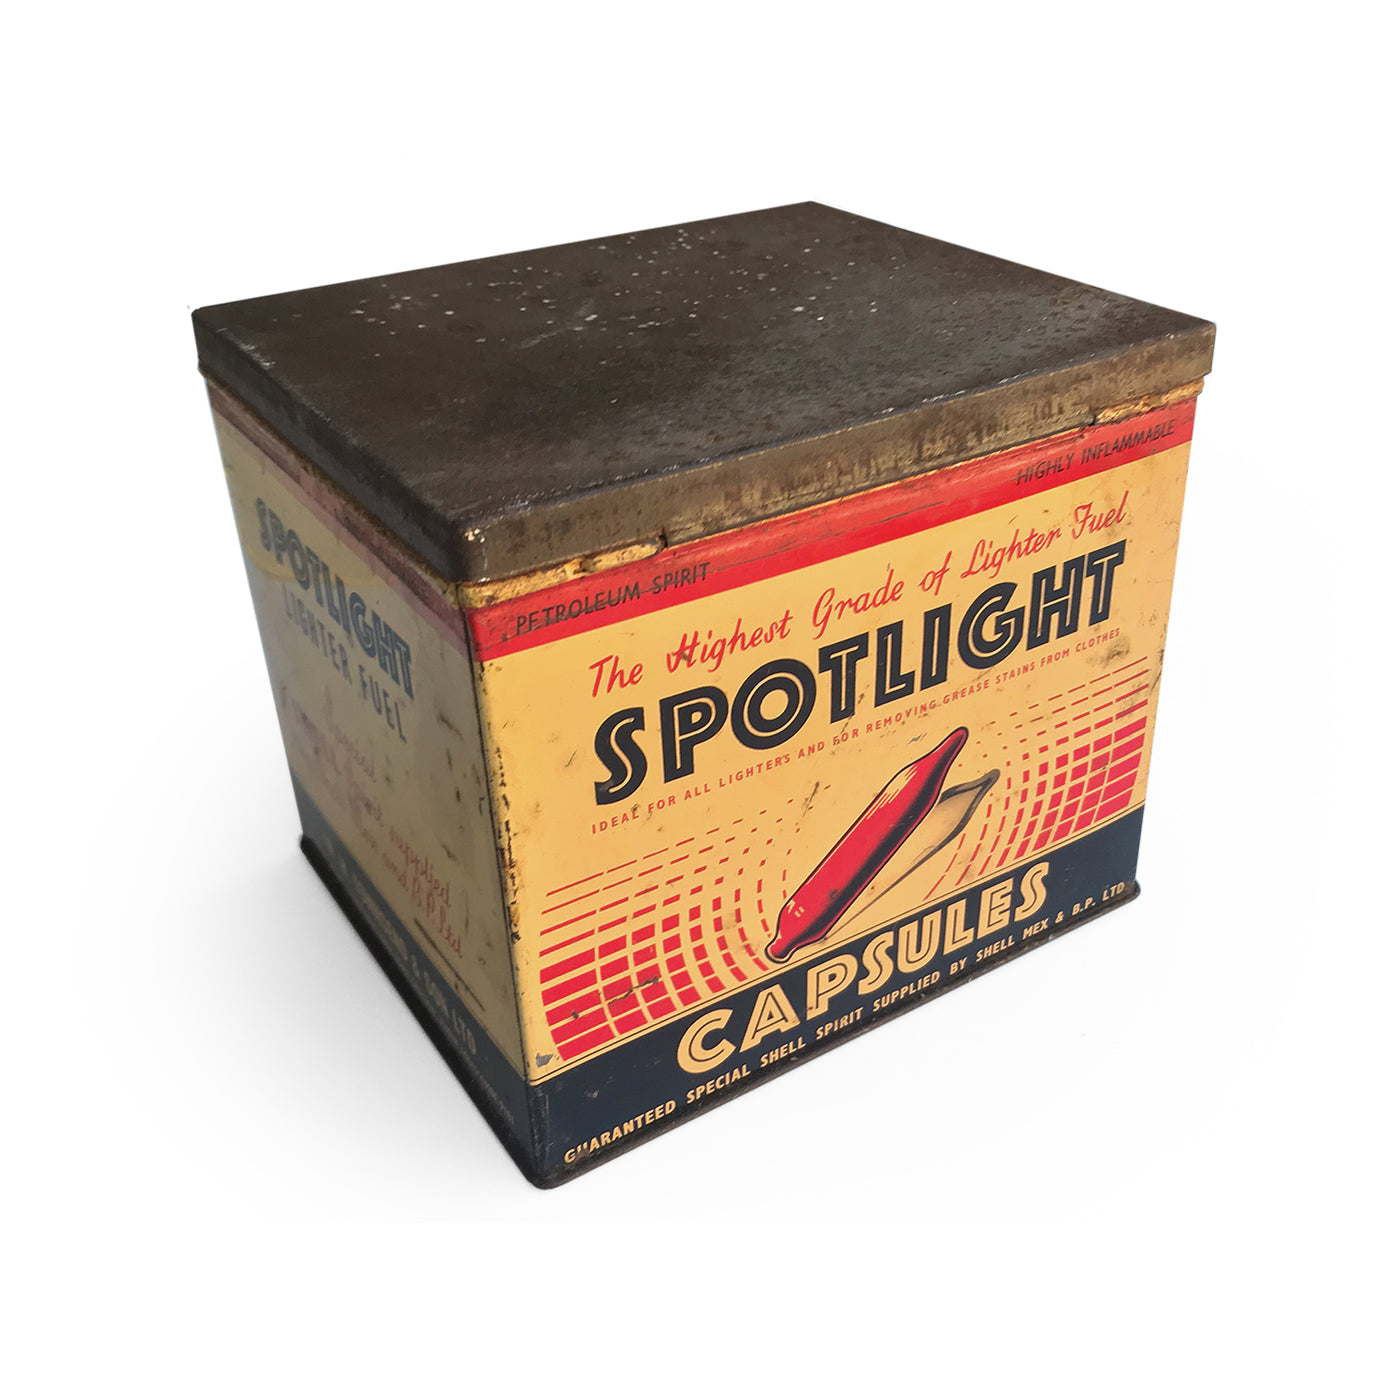 Vintage Spotlight Tin. Find this and other Vintage Tins & Toys for sale at Intovintage.co.uk.